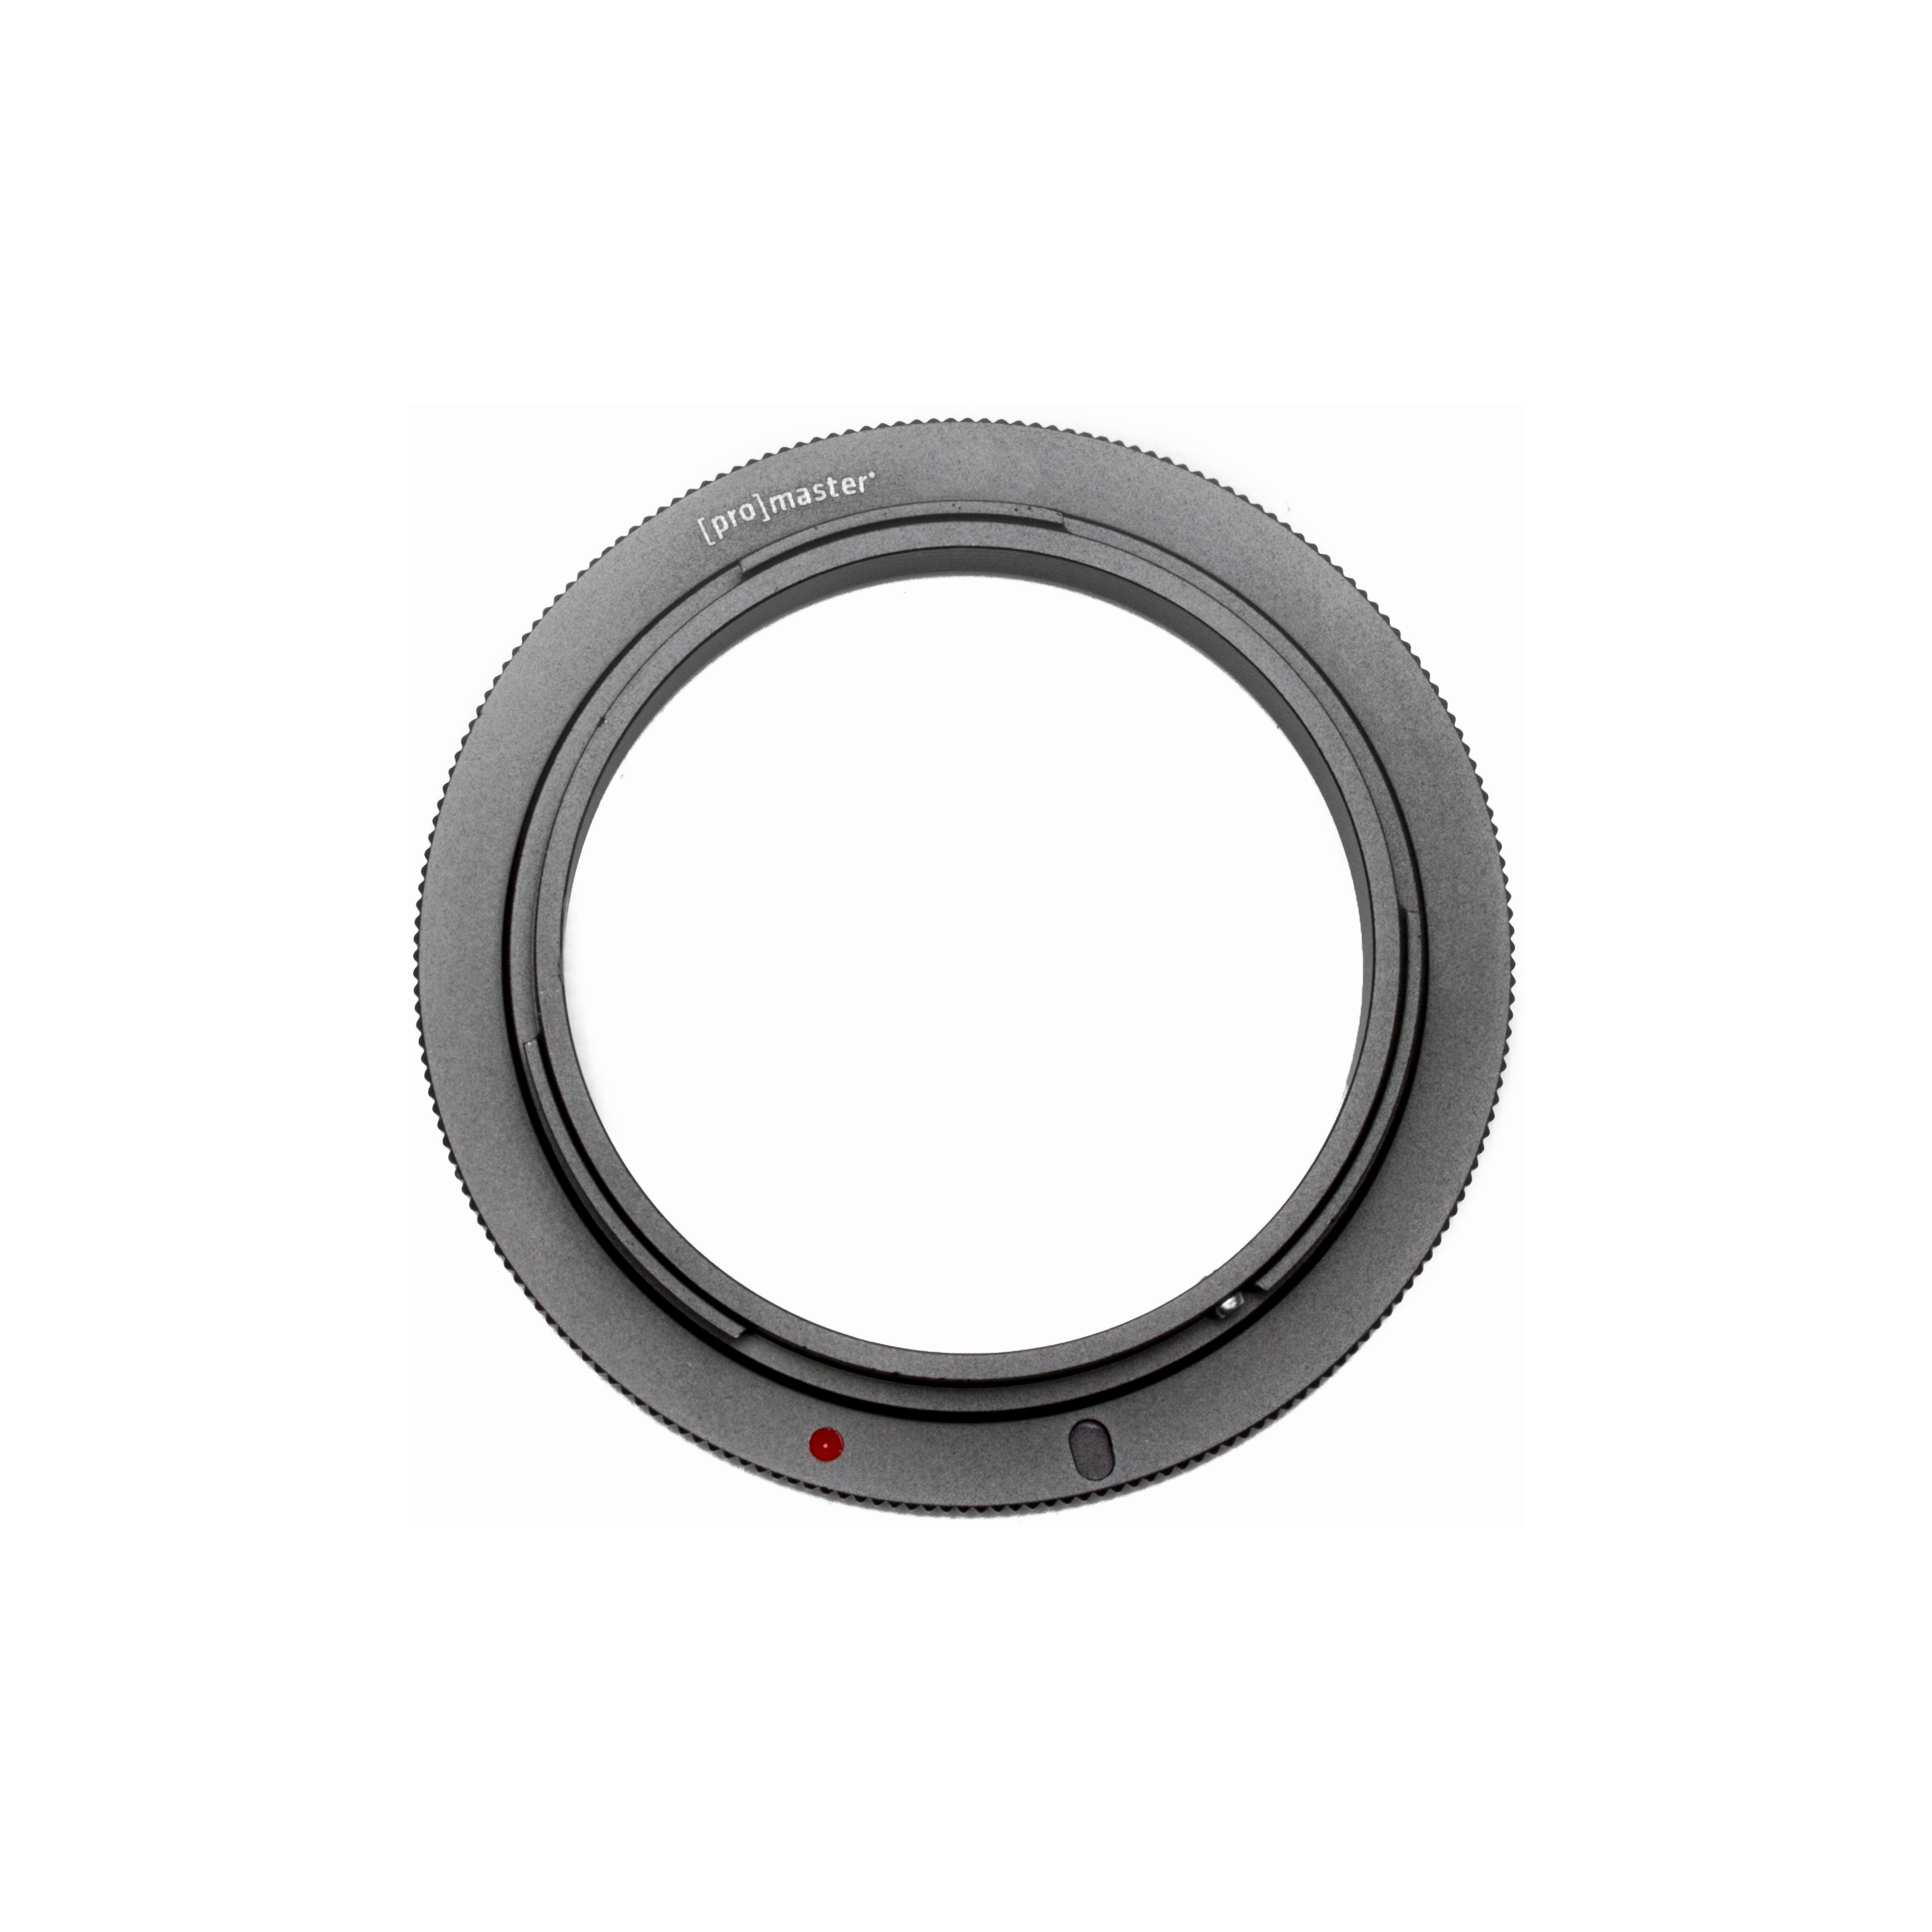 Promaster 6651 Reverse Ring - 62mm Canon